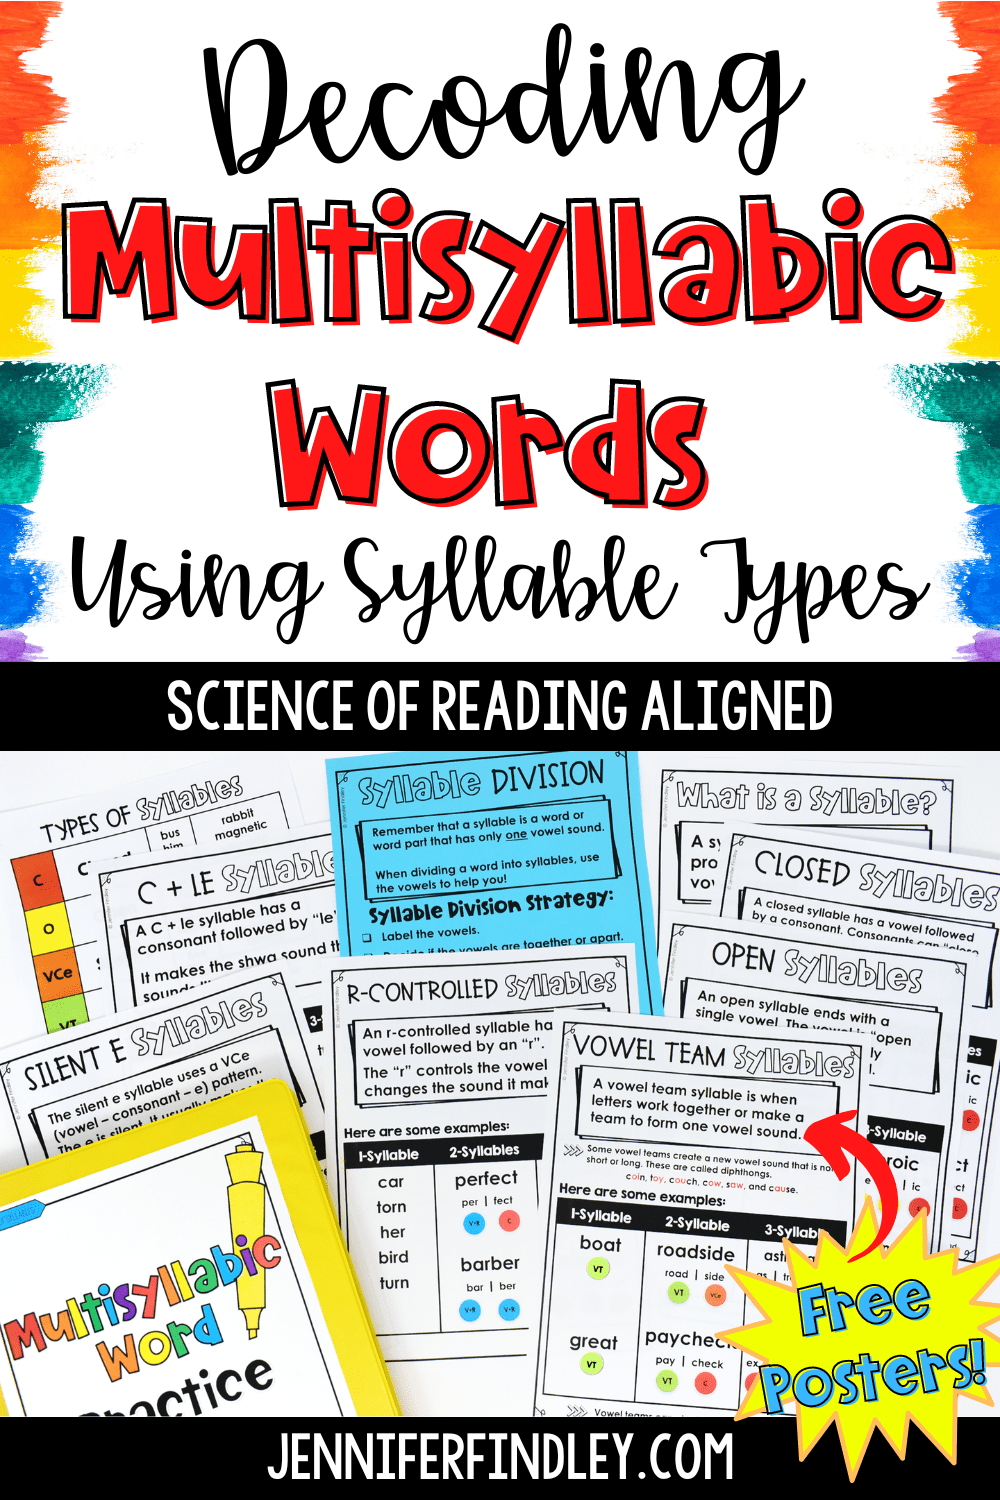 Do your students struggle with decoding multisyllabic words? Teaching syllable types is a great first step! Read more and grab free posters to help with instruction.